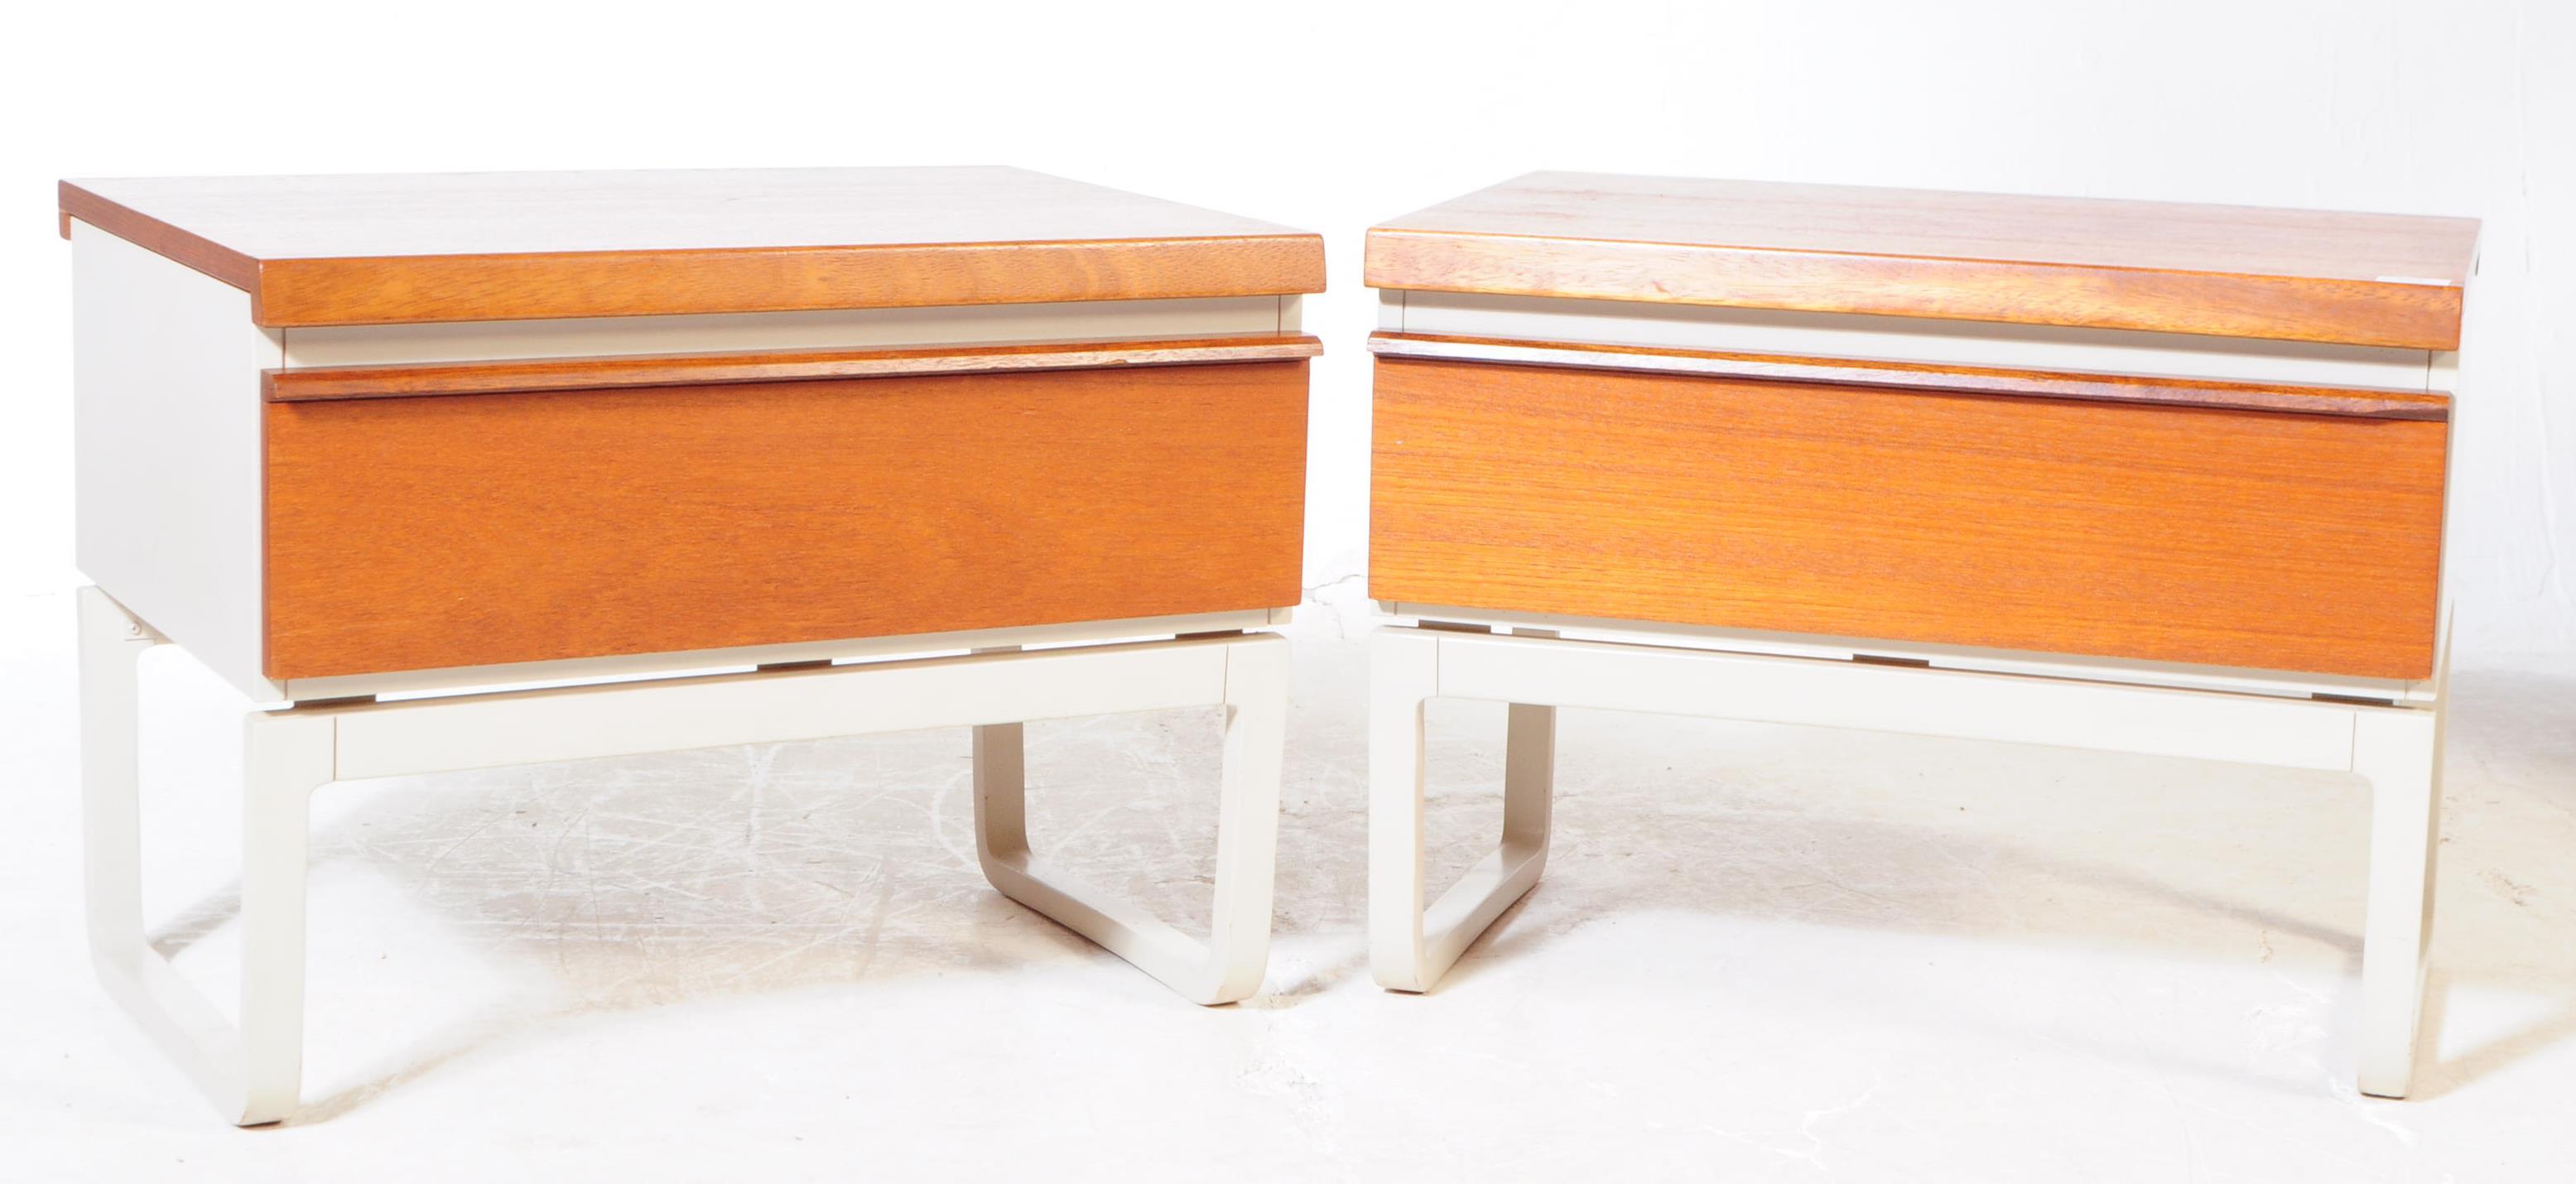 BCM BATH CABINET MAKERS 1960S BEDSIDE TABLES